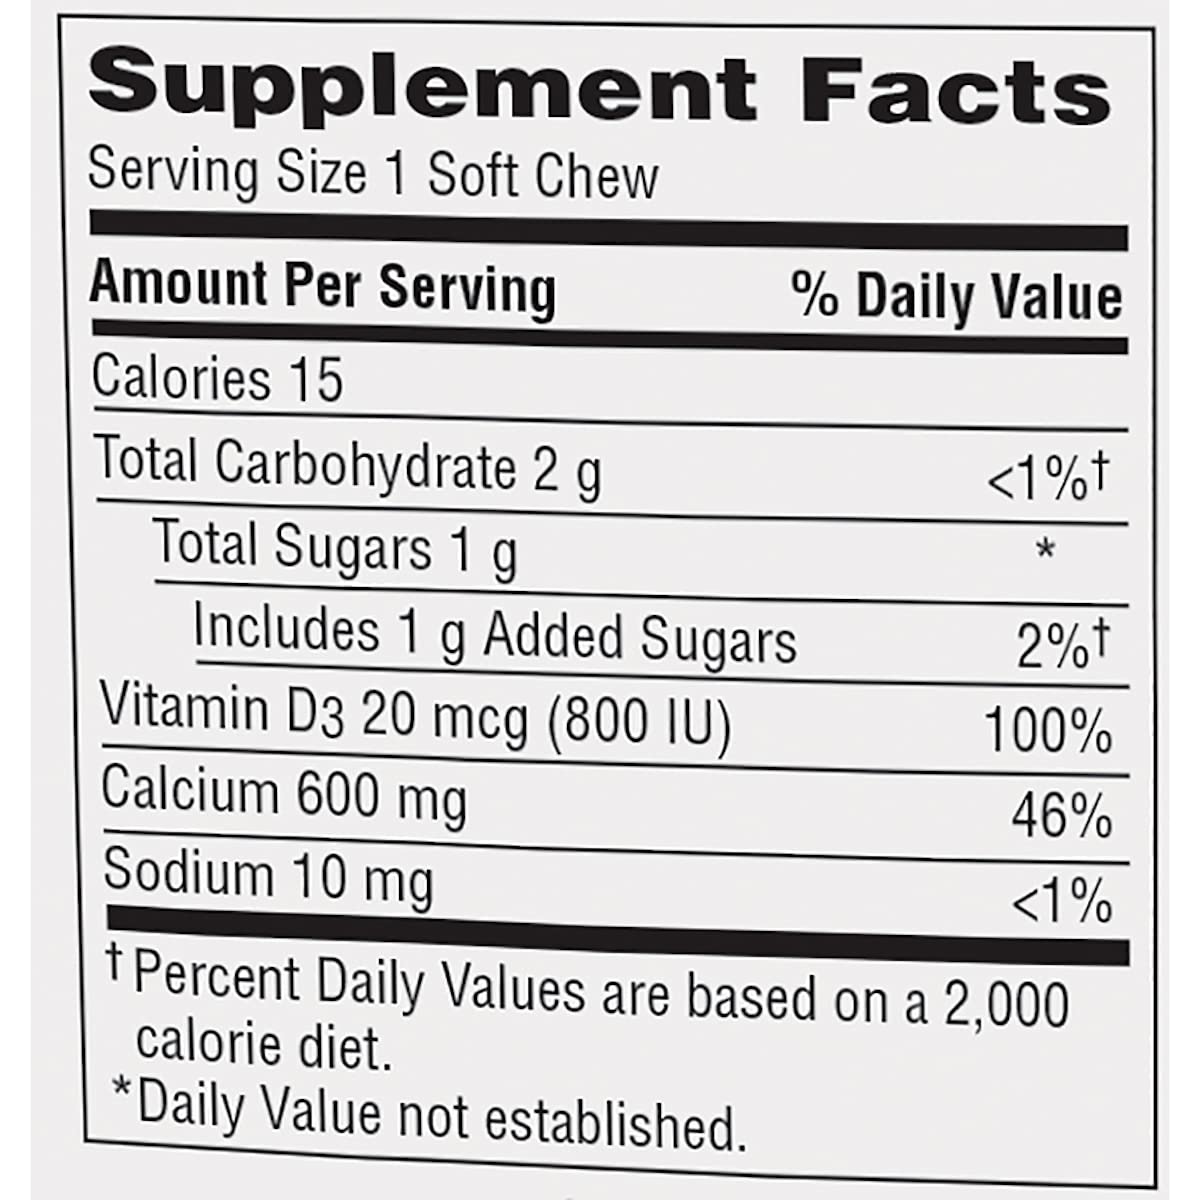 Caltrate Soft Chews 600 Plus D3 Calcium Vitamin D Supplement, Chocolate Truffle - 60 Count(Packaging May Vary)